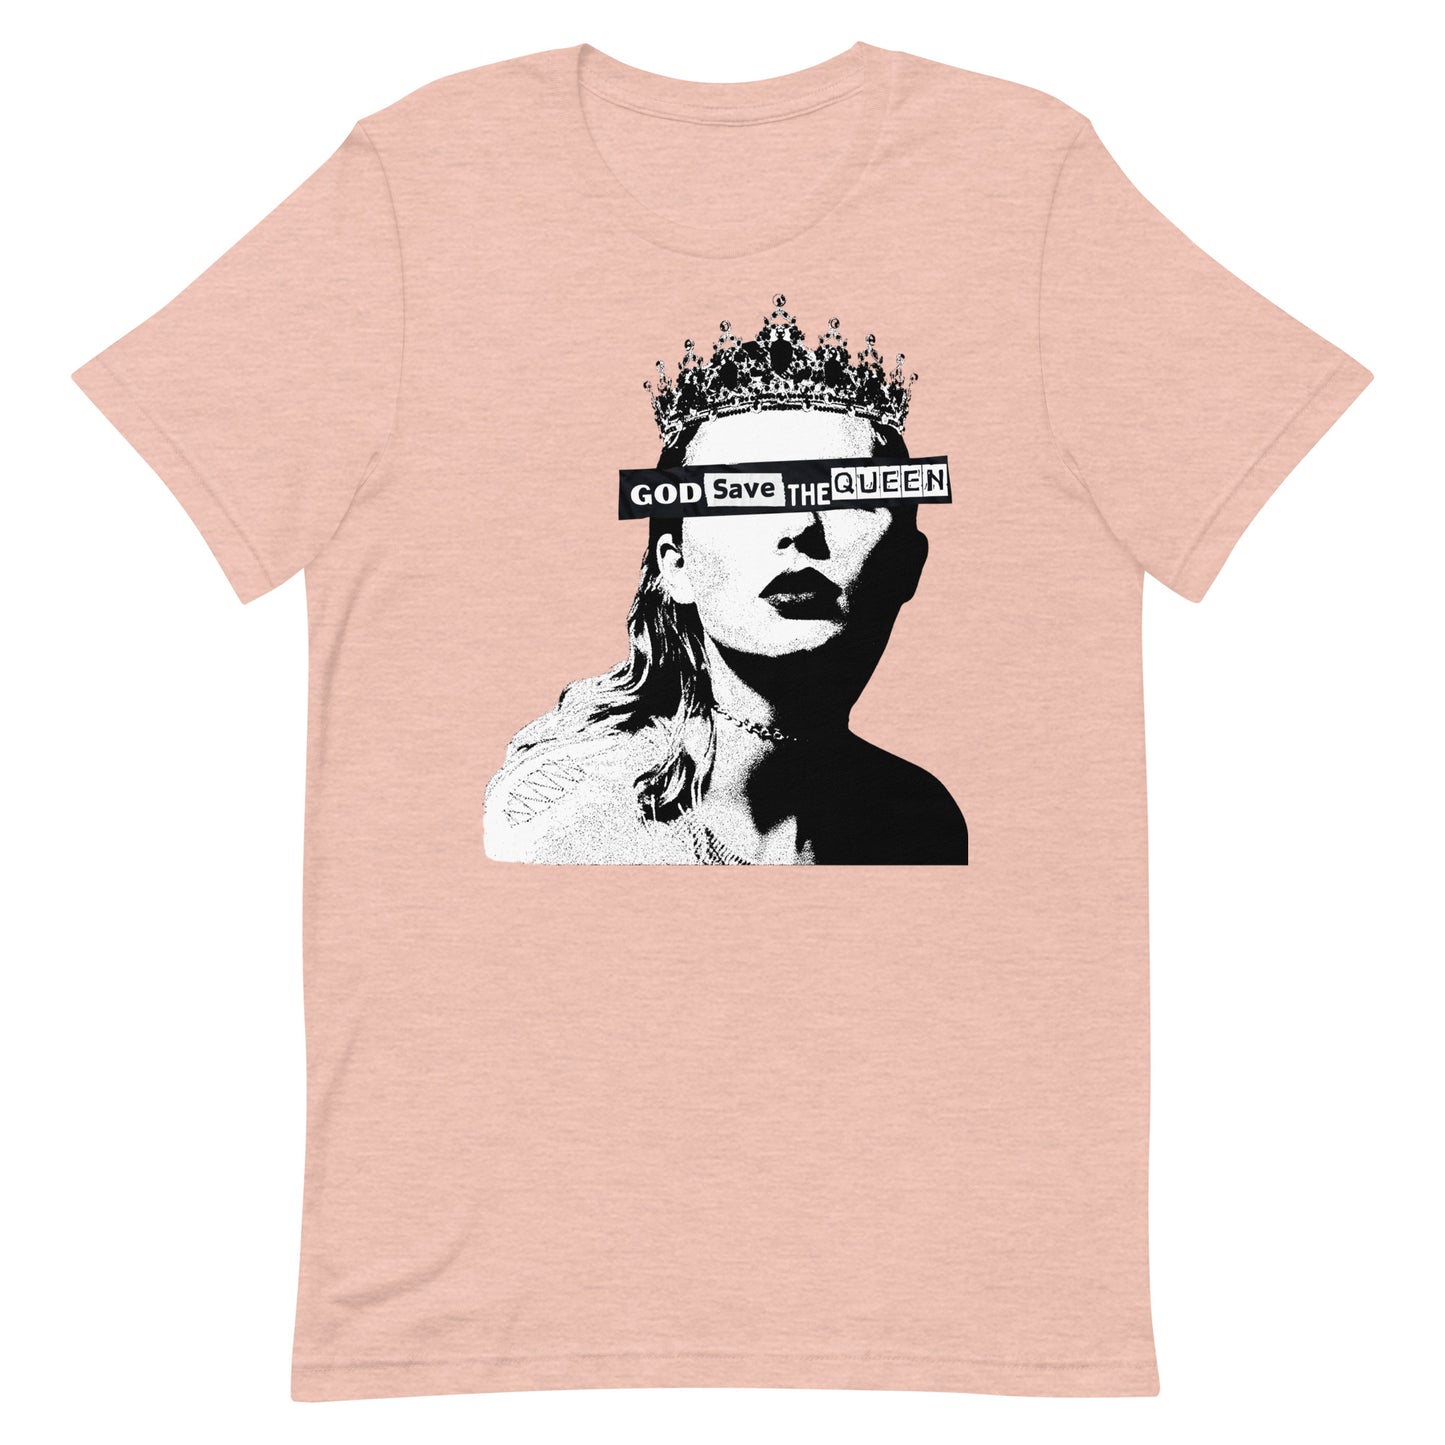 "God Save the Queen" Tee